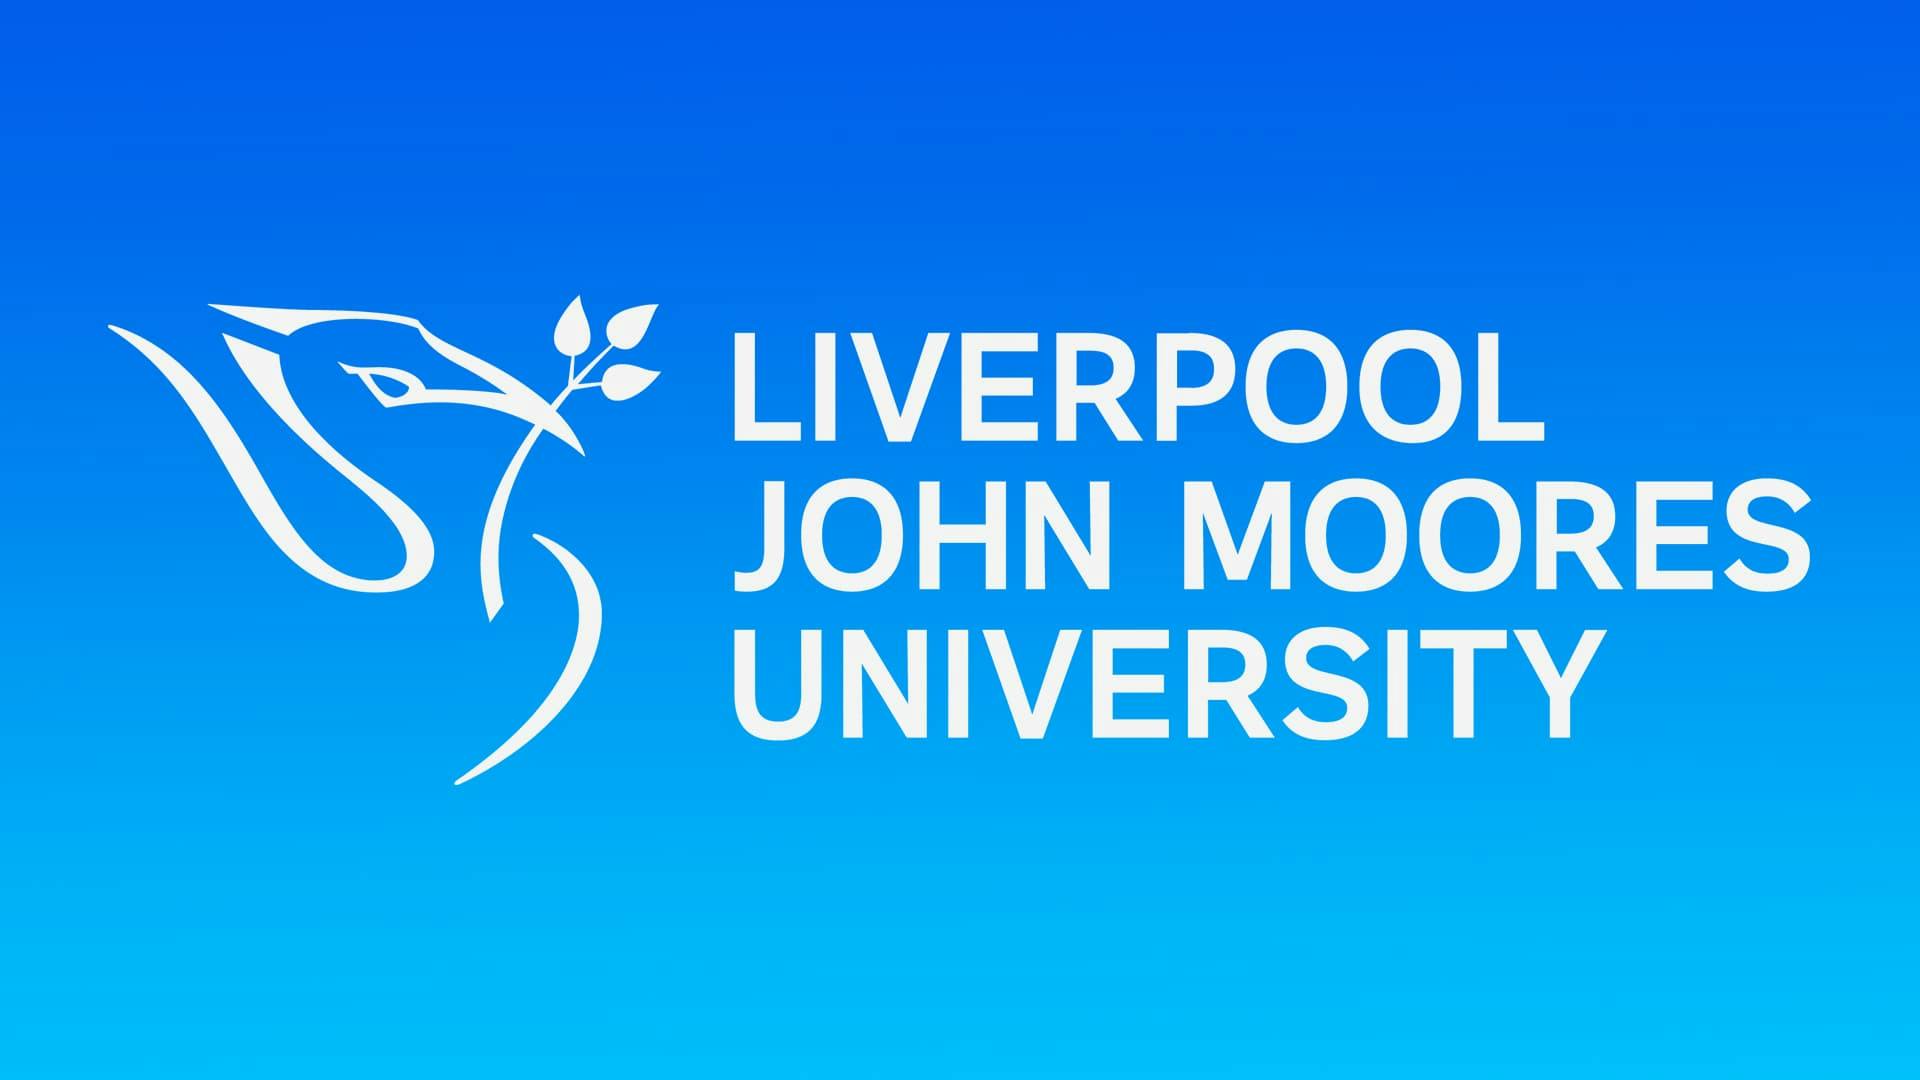 The Liverpool John Moore's University logo sits on a blue background.